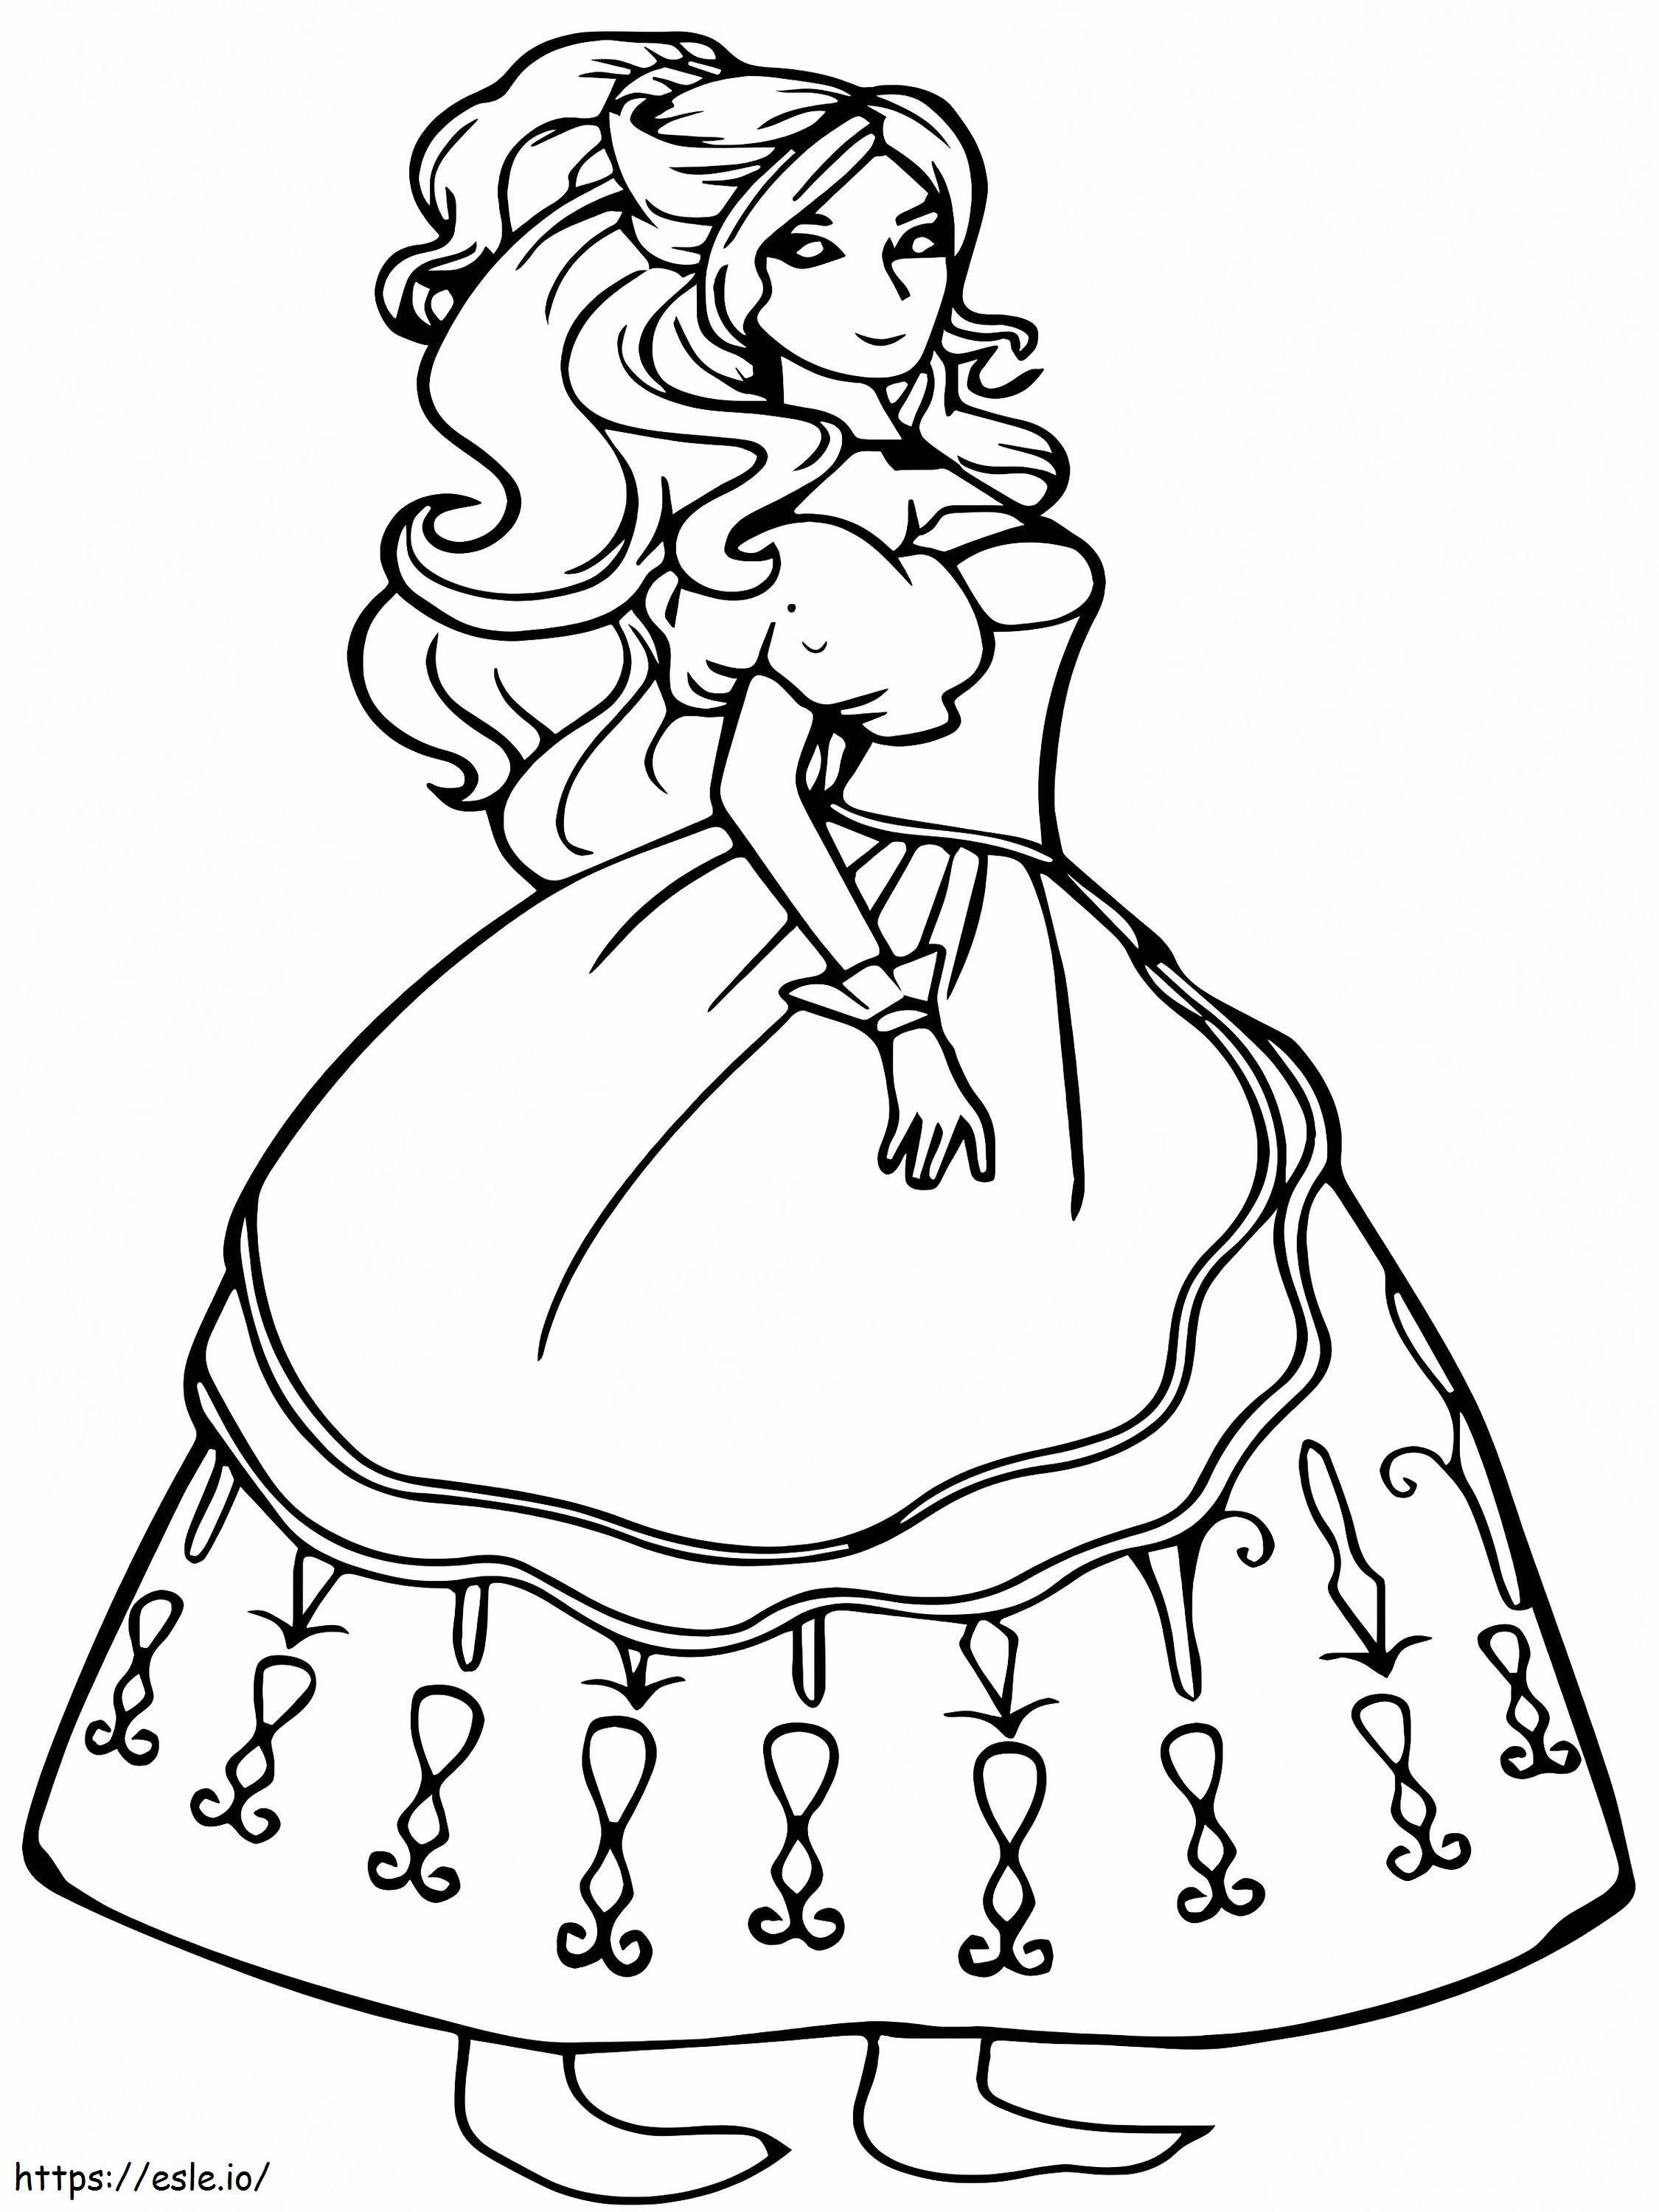 Gorgeous Princess And The Pea coloring page